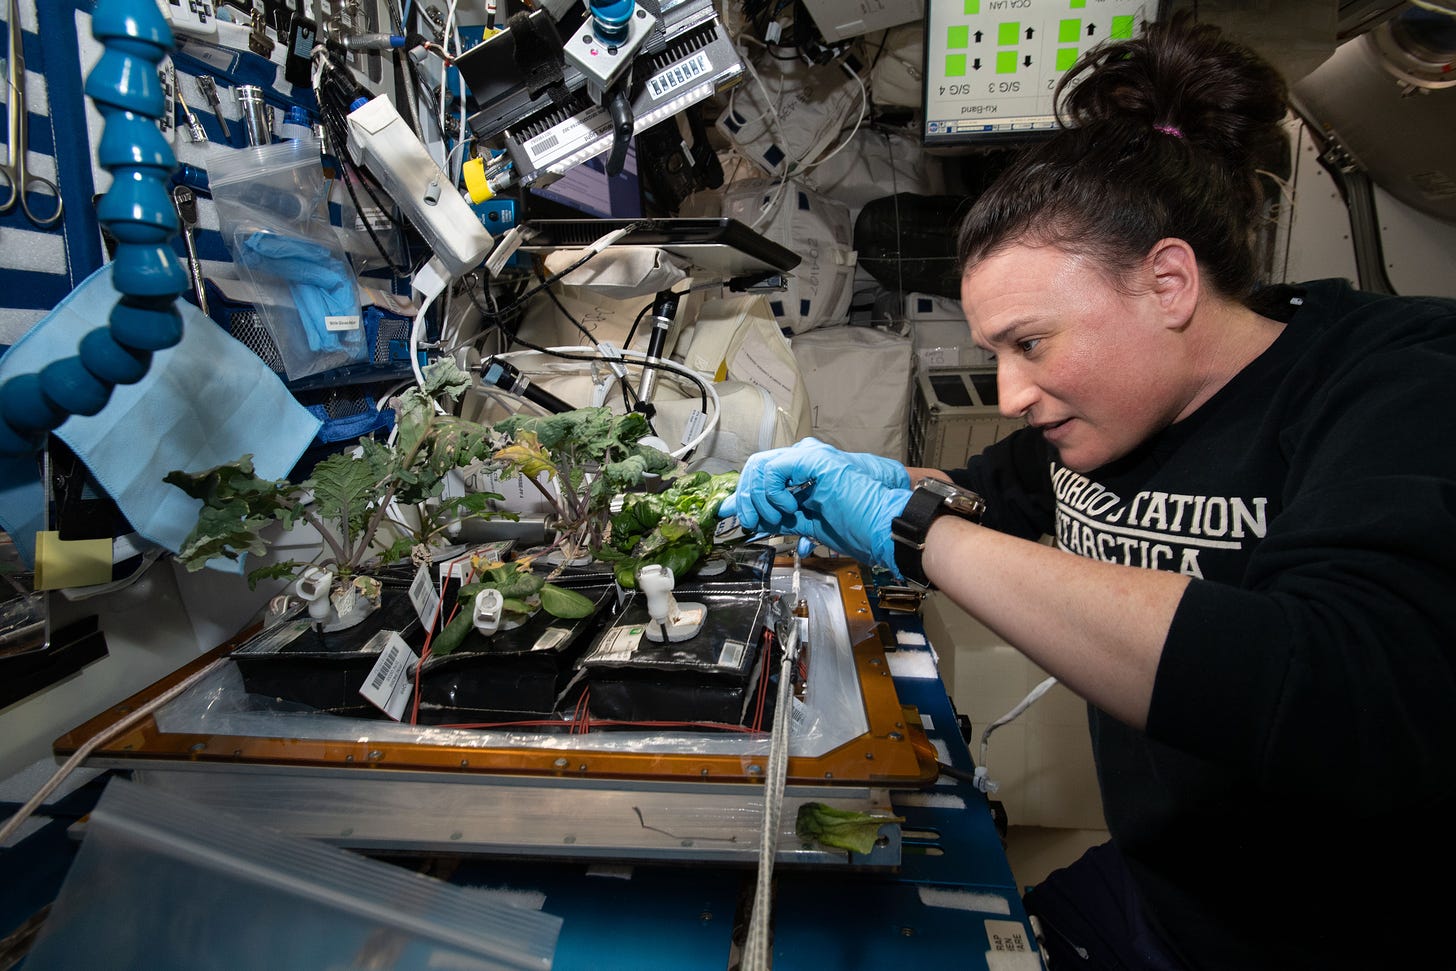 A female astronaut plucks green leaves from a vegetable tray in a cluttered corner of the International Space Station.